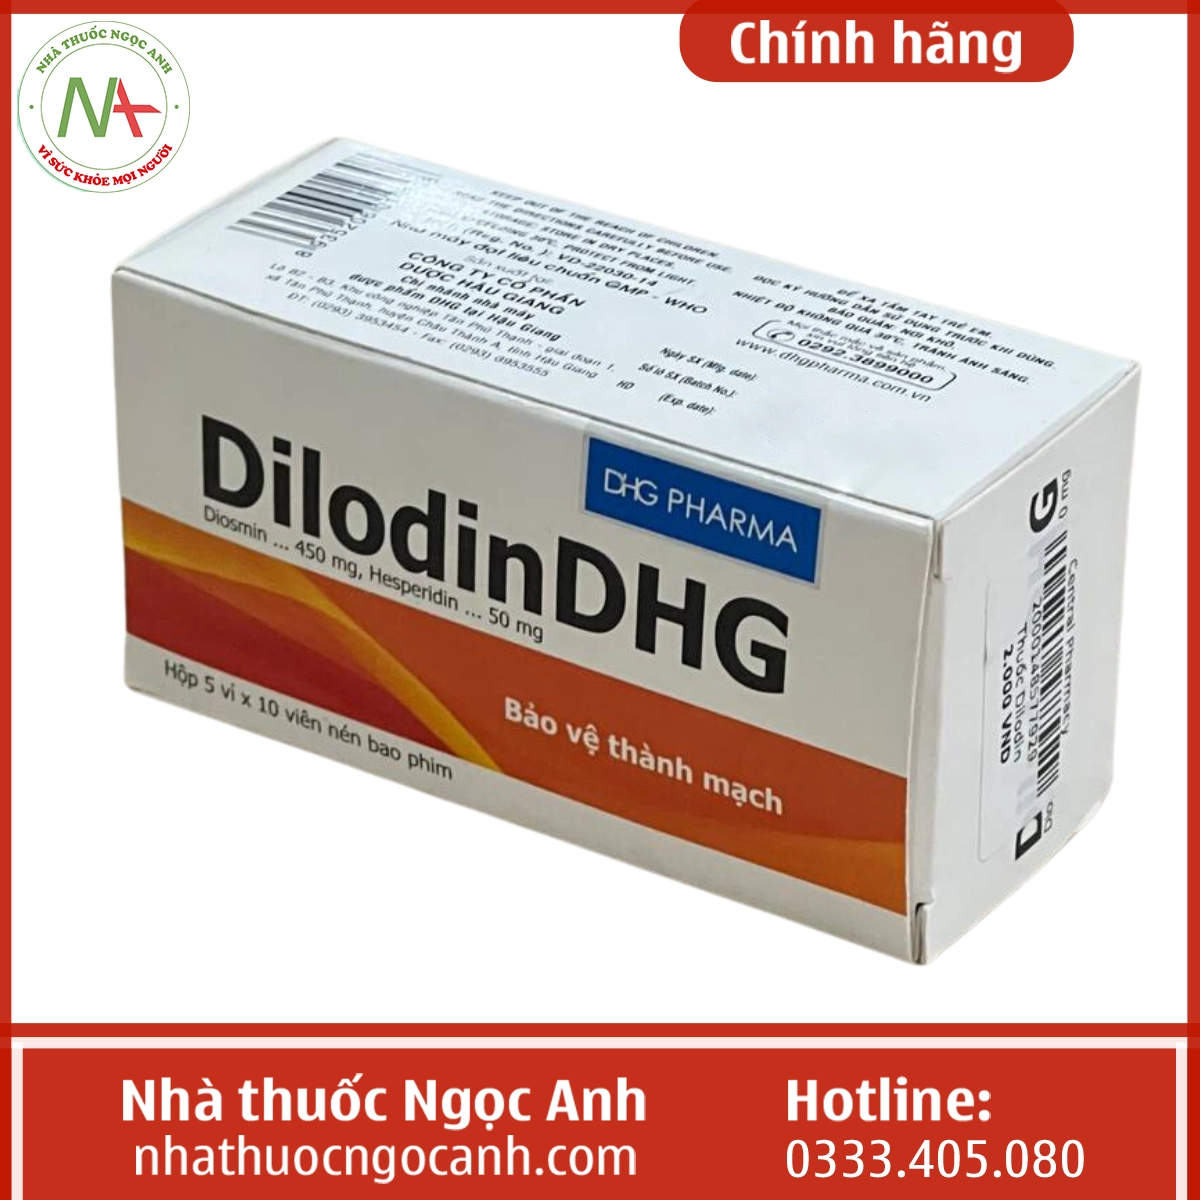 Hộp thuốc DilodinDHG